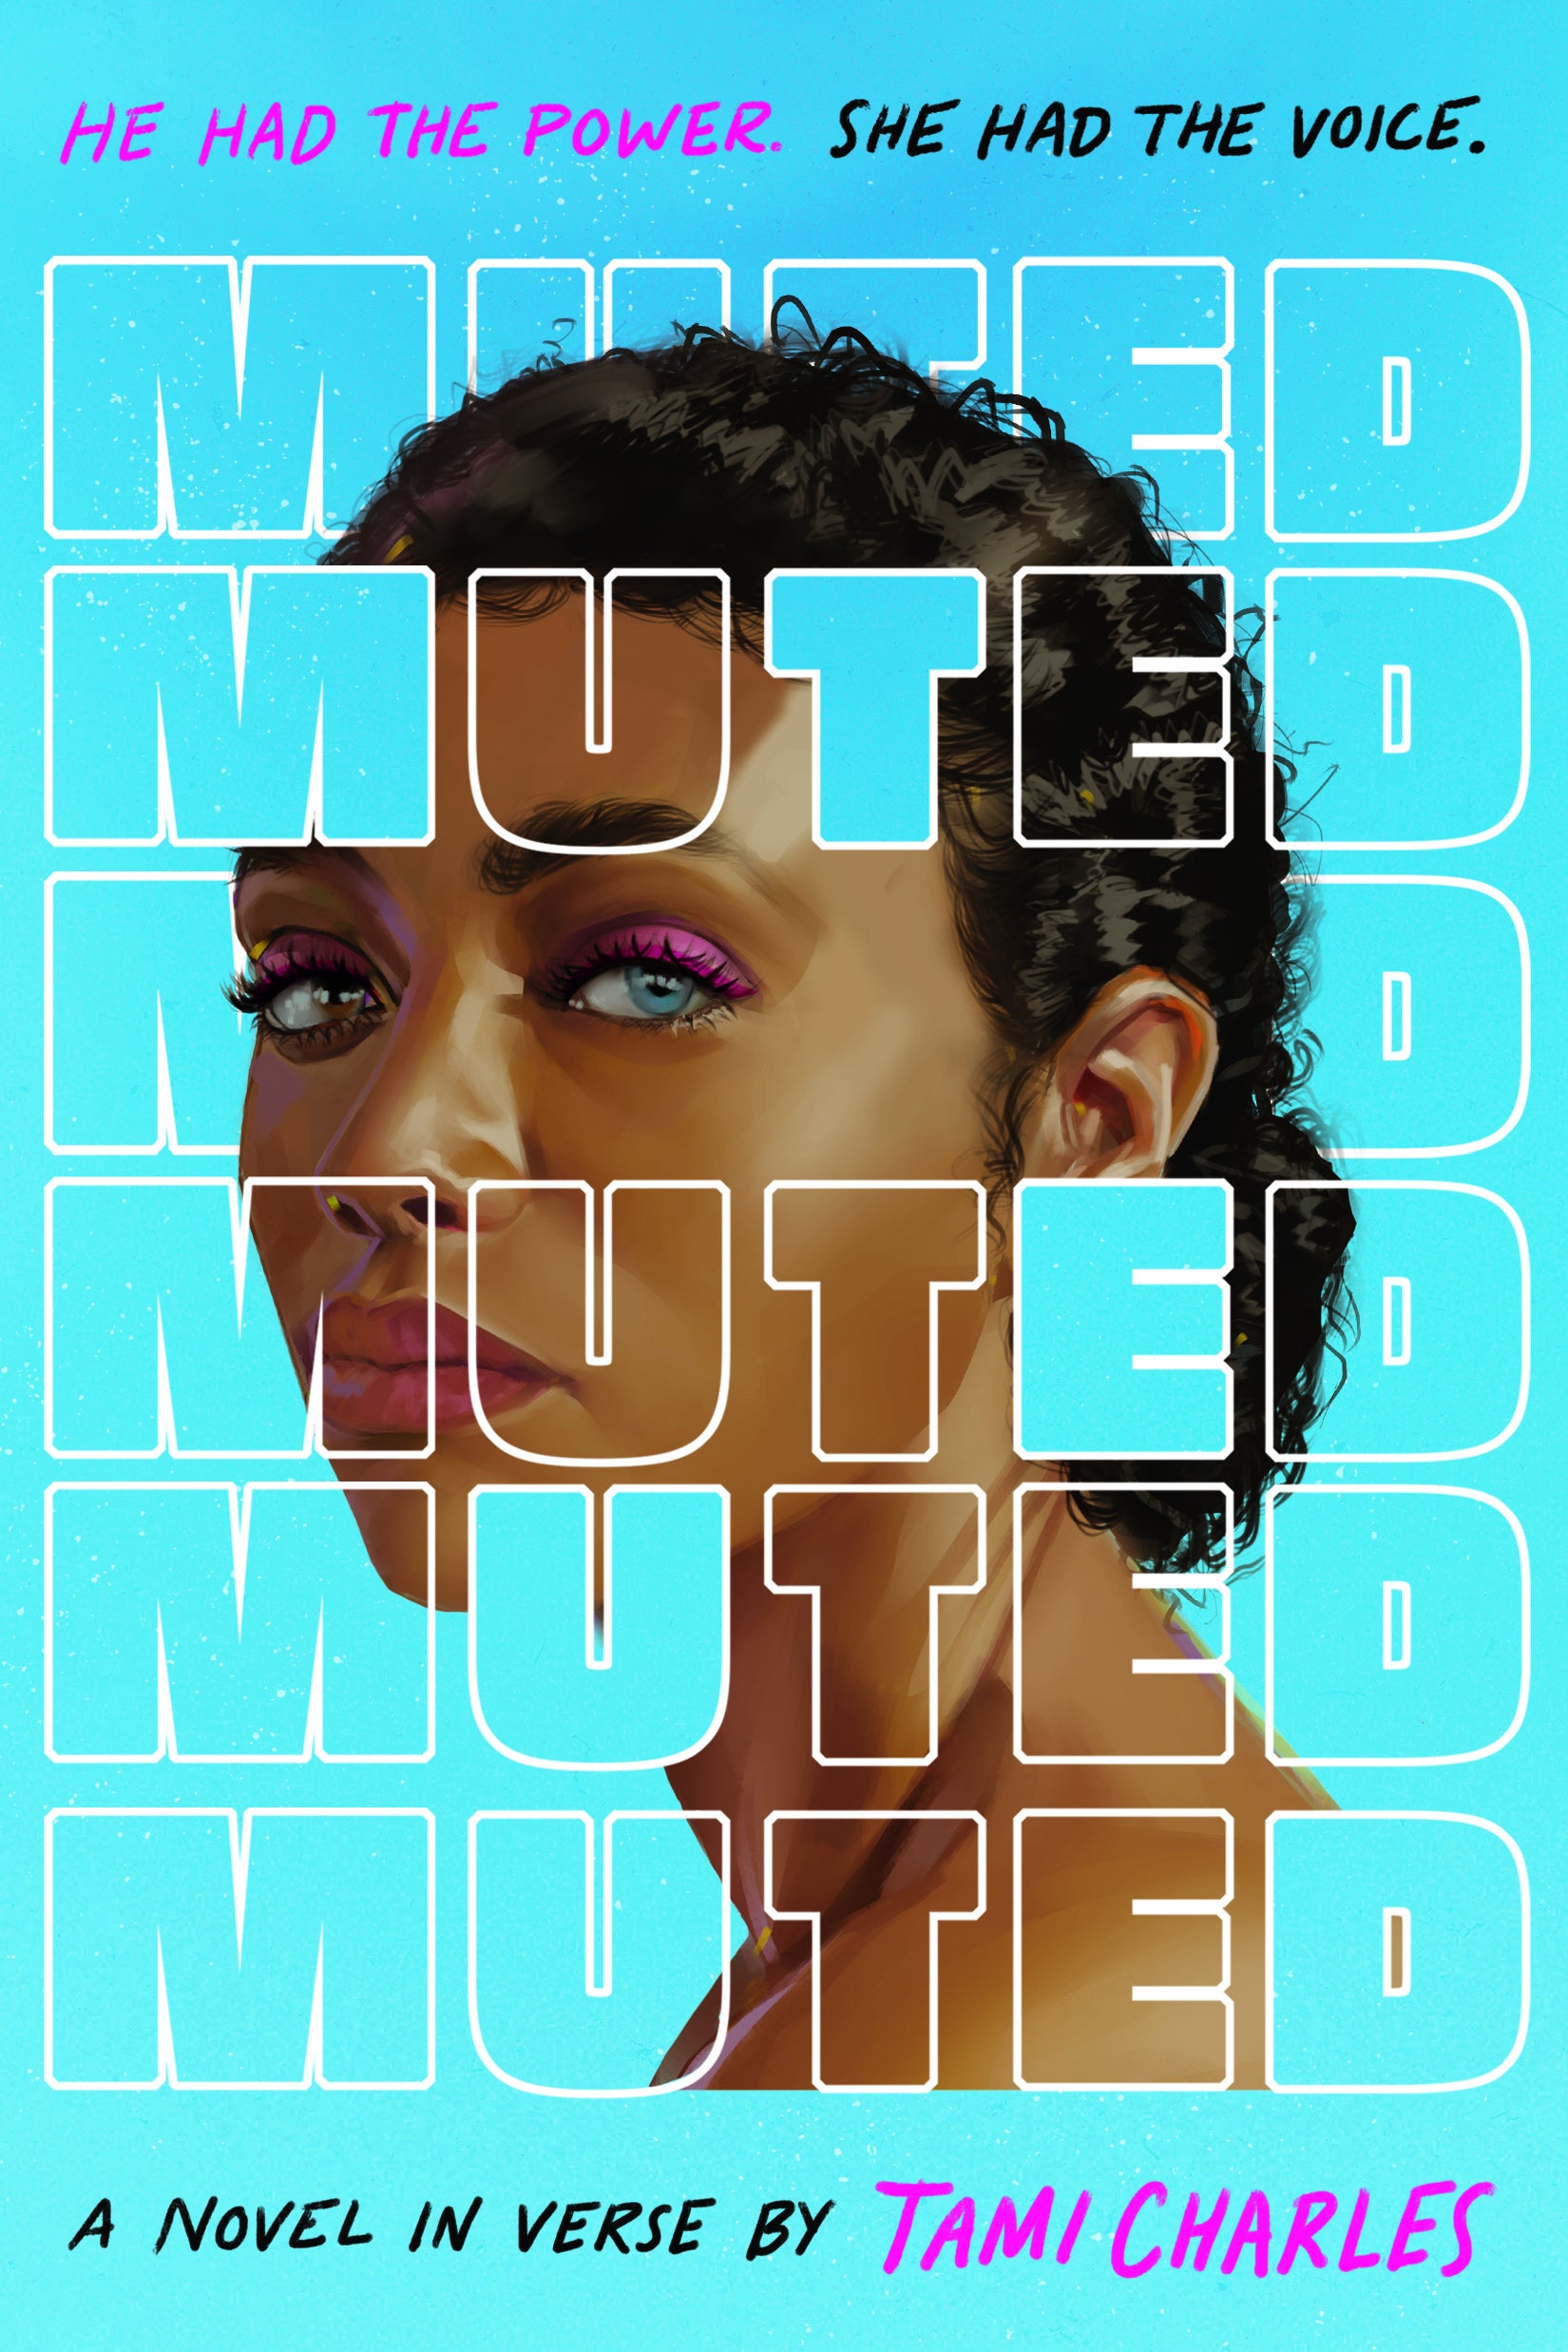 Tami Charles, Author Of ‘Muted,’ On How Black Women Can Find Their Voice Through Poetry